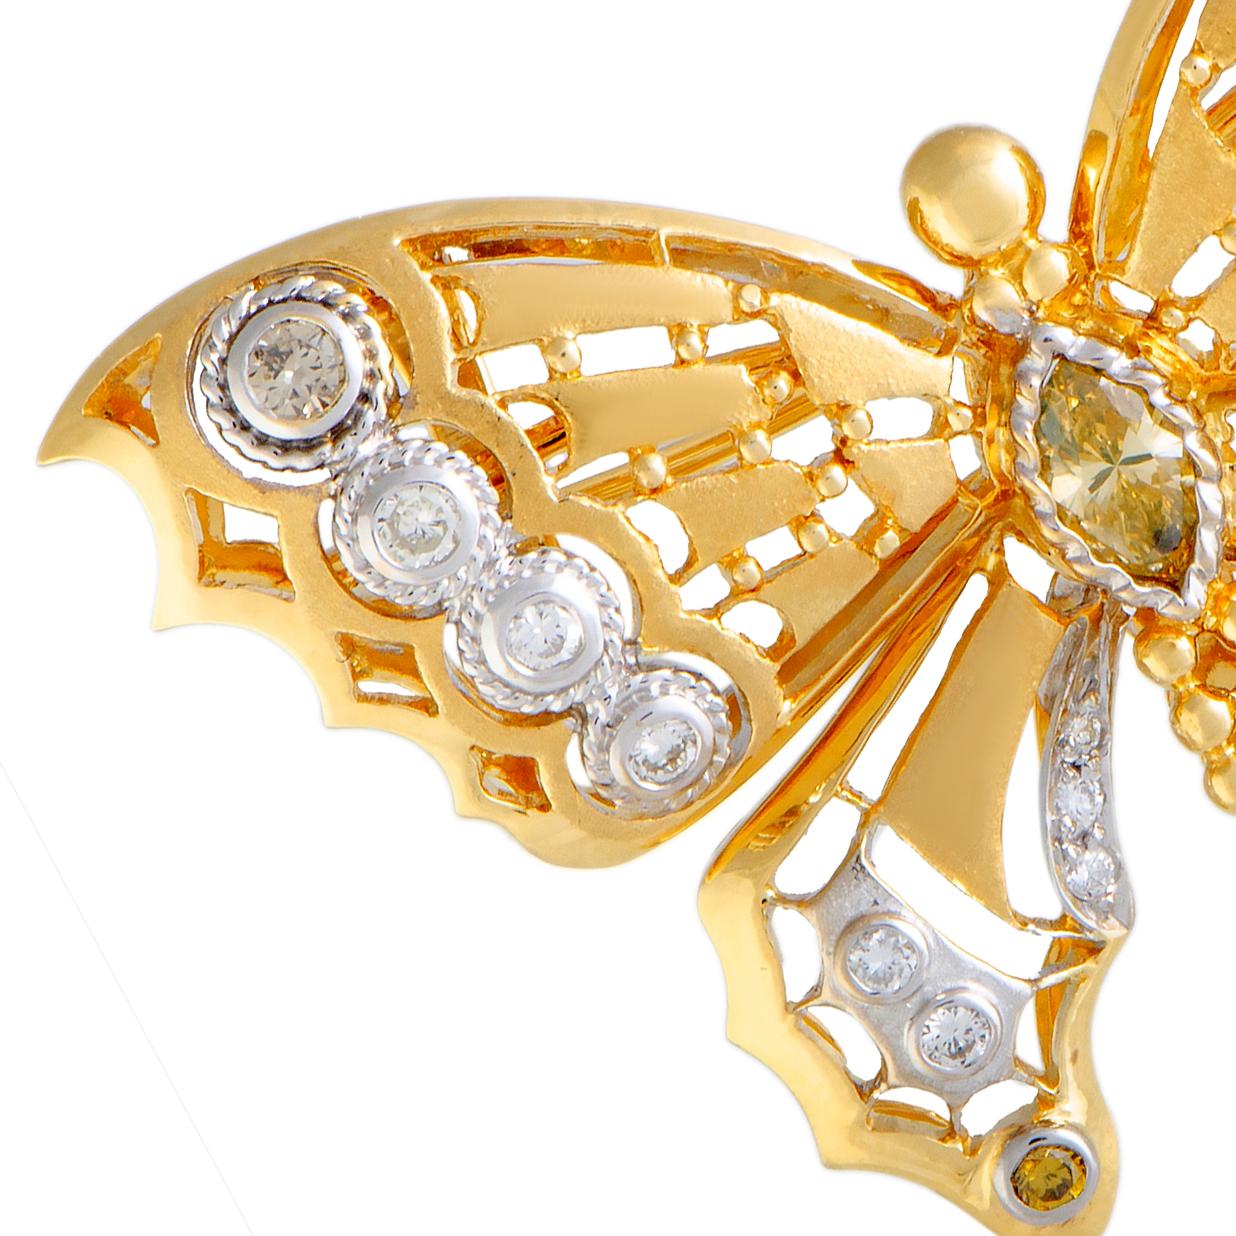 The eye-catching radiance of 18K yellow gold is attractively accentuated by the elegant gleam of 18K white gold in this spectacular brooch that takes the form of a graceful butterfly. The brooch is given a delightful touch of scintillating